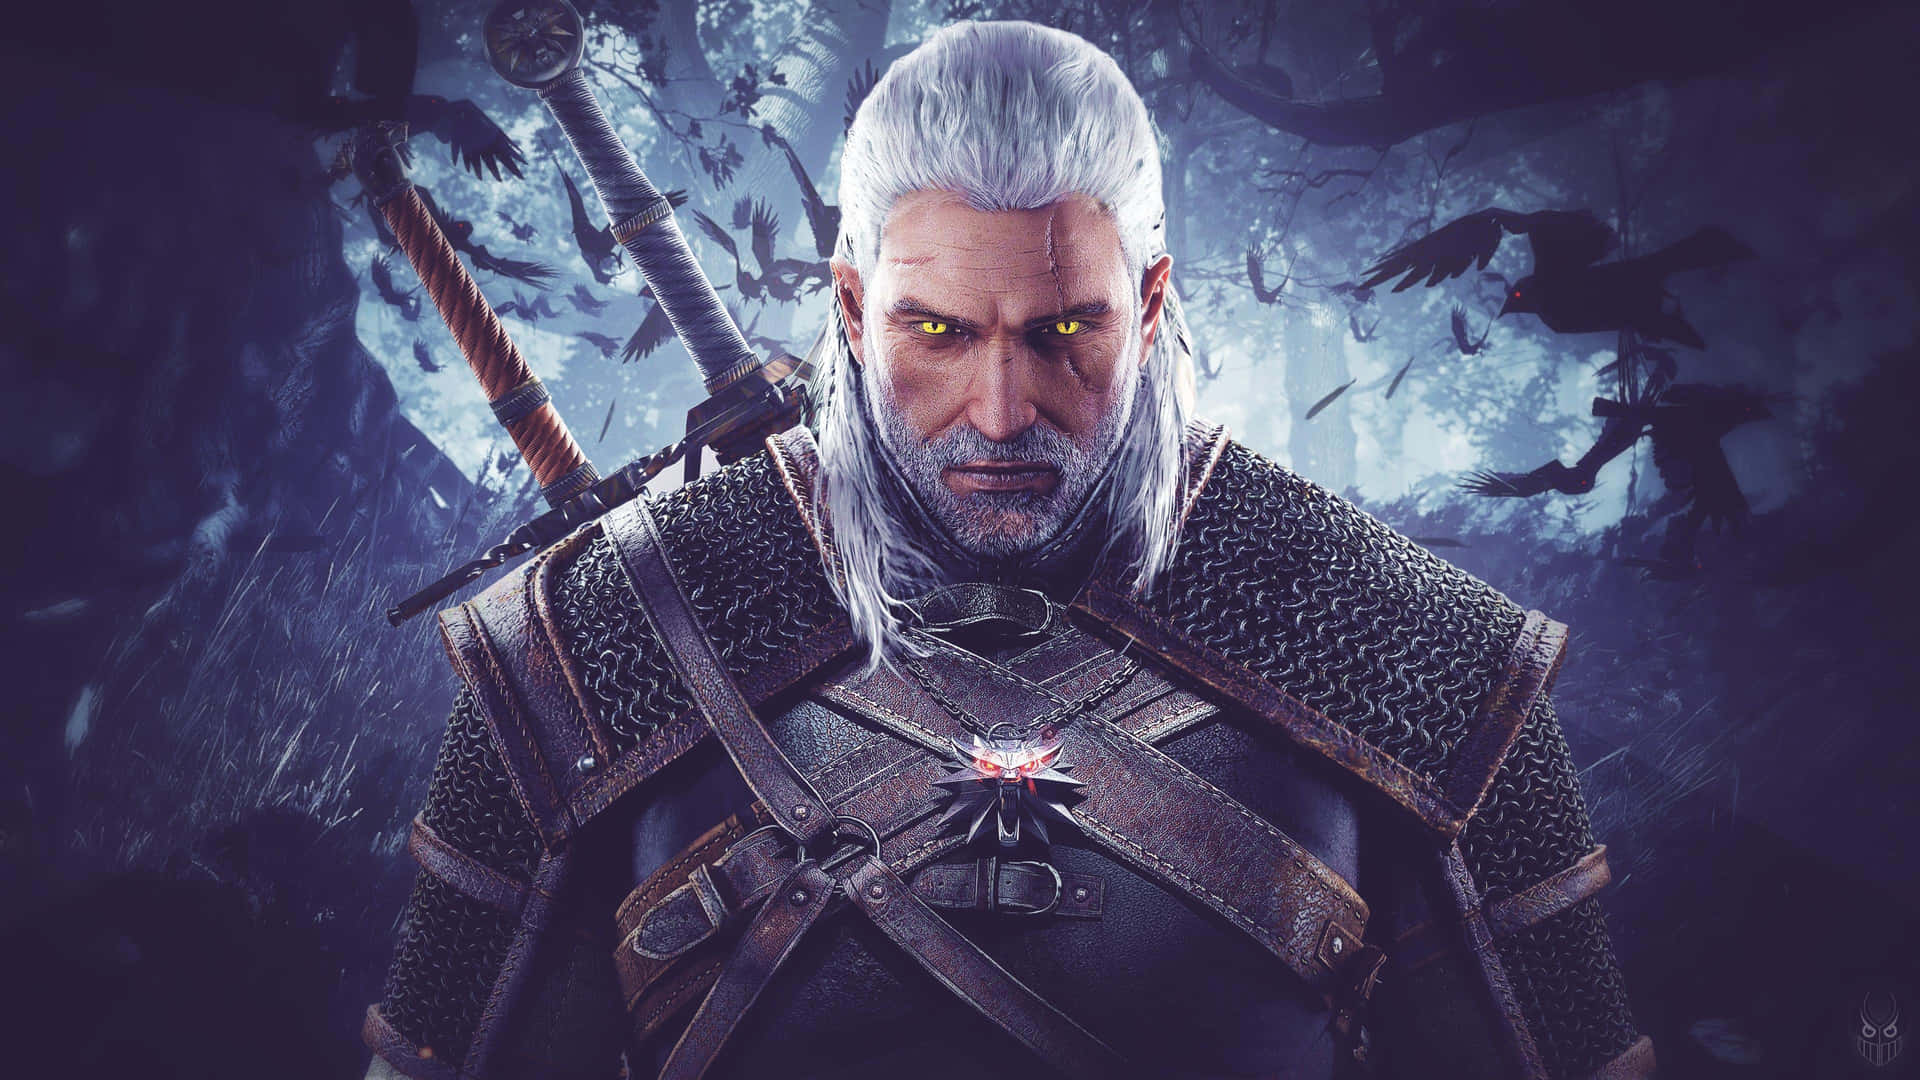 The Witcher - Geralt of Rivia in an Epic Battle